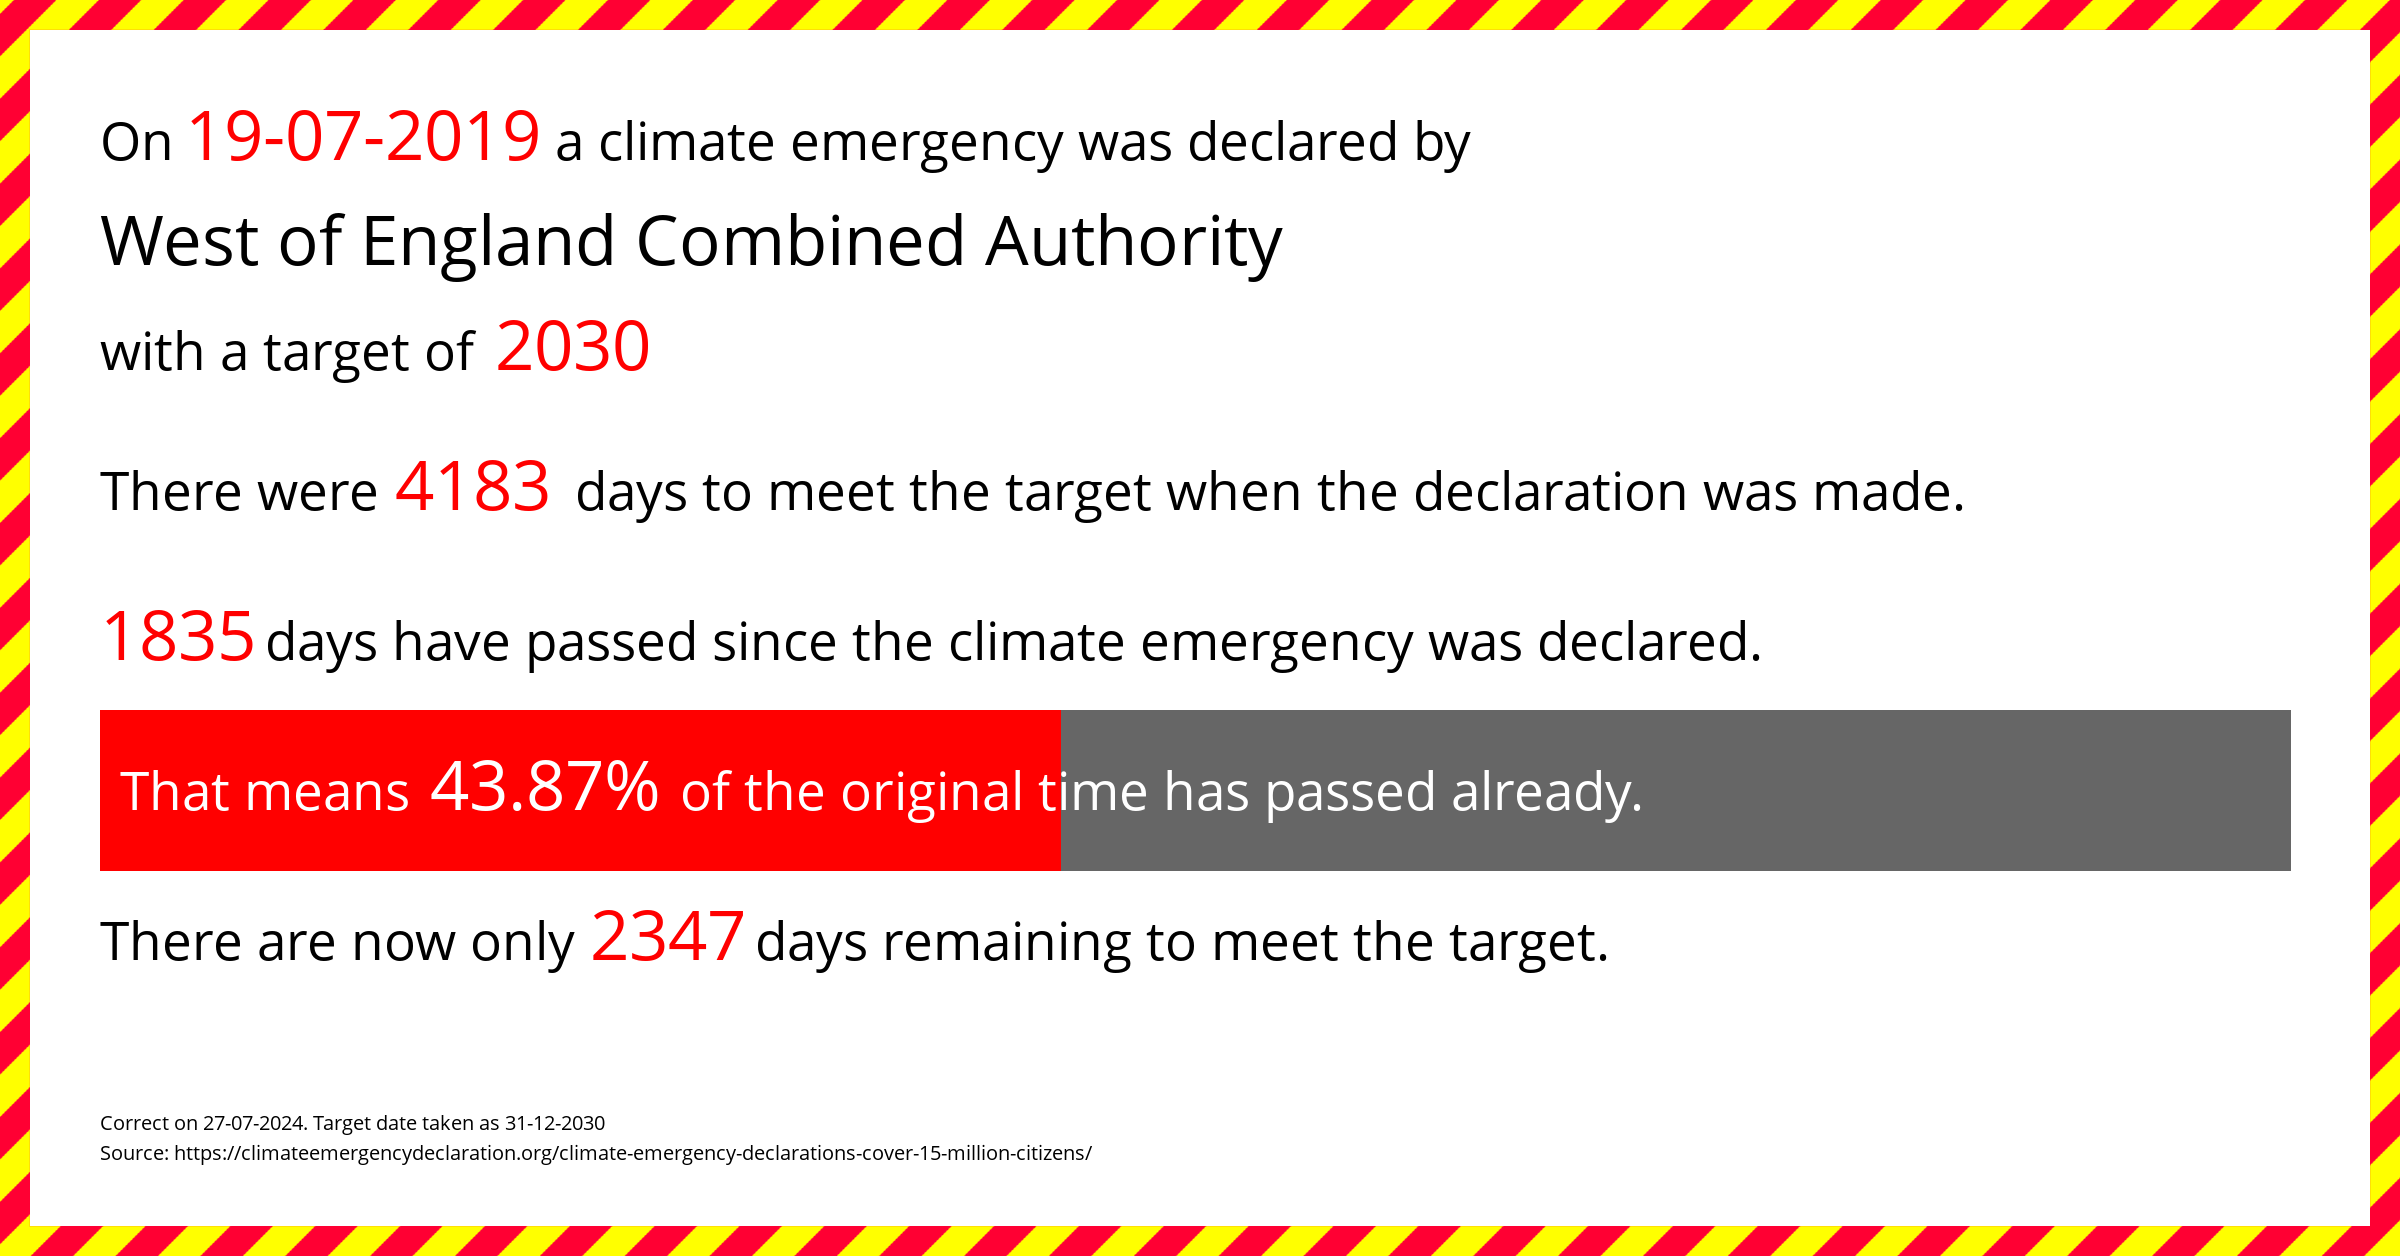 West of England Combined Authority declared a Climate emergency on Friday 19th July 2019, with a target of 2030.